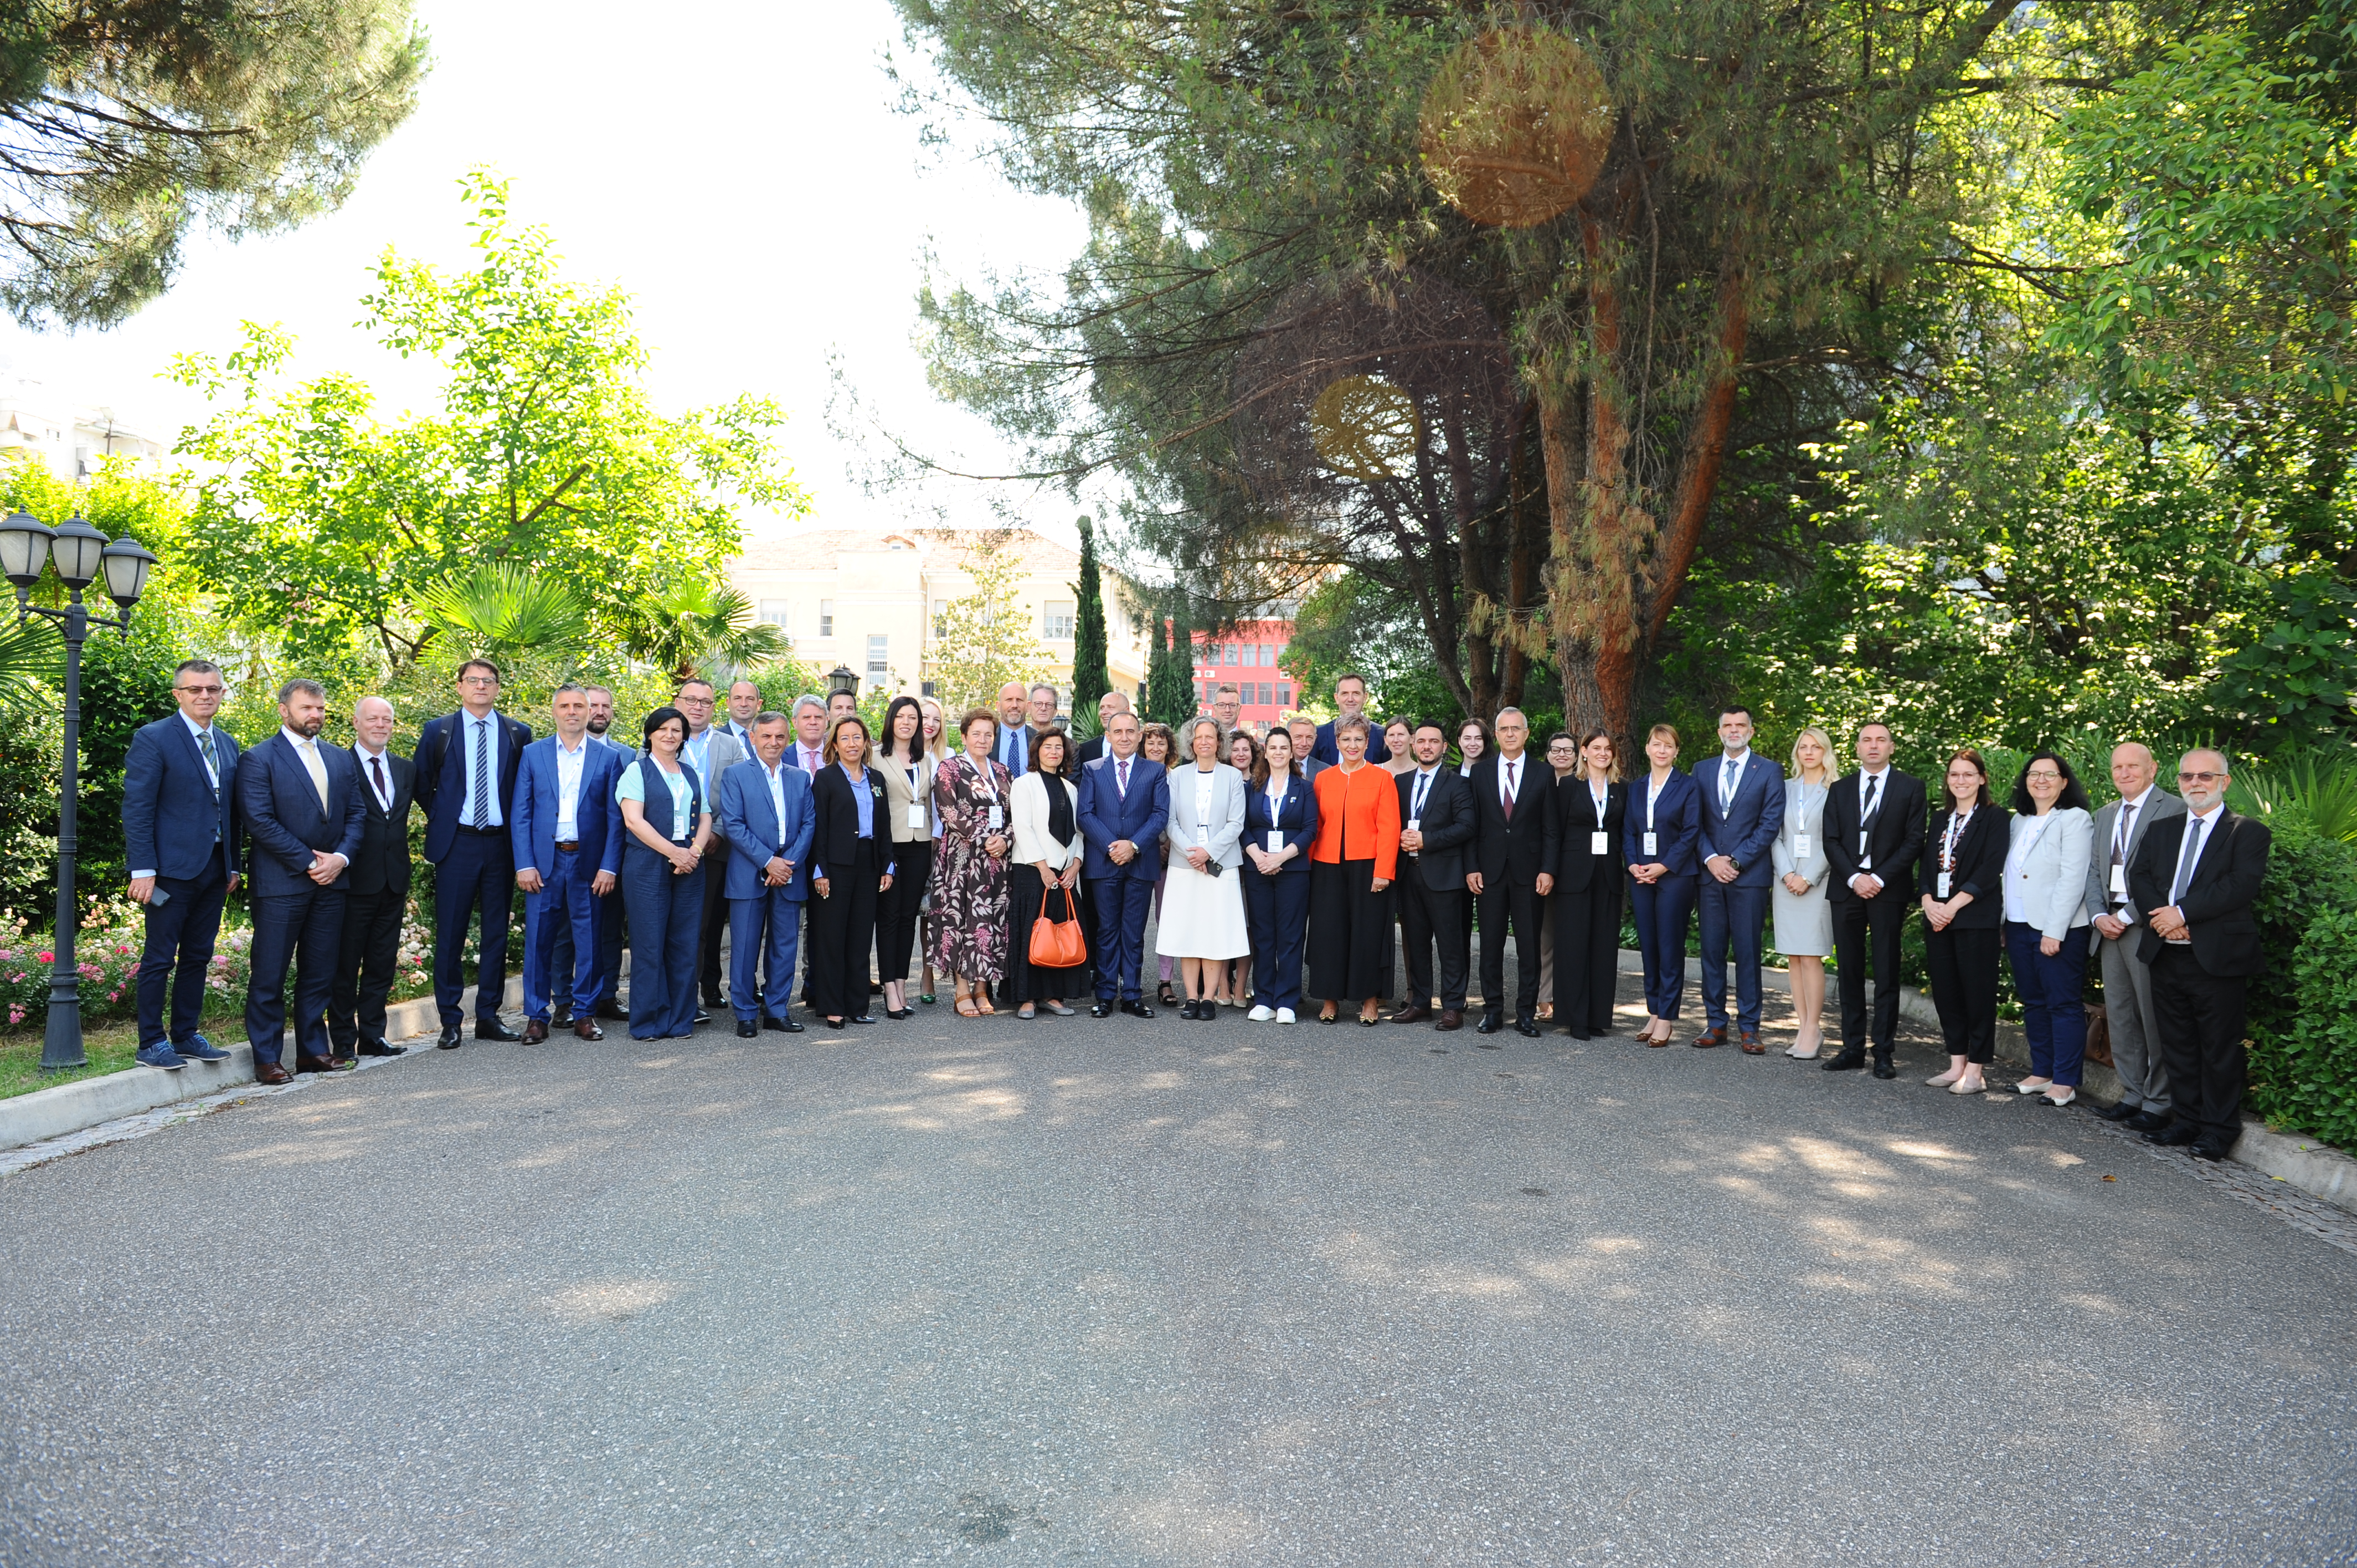 High-level meeting on small and light weapons control took place in Tirana on 21-22 June 2023